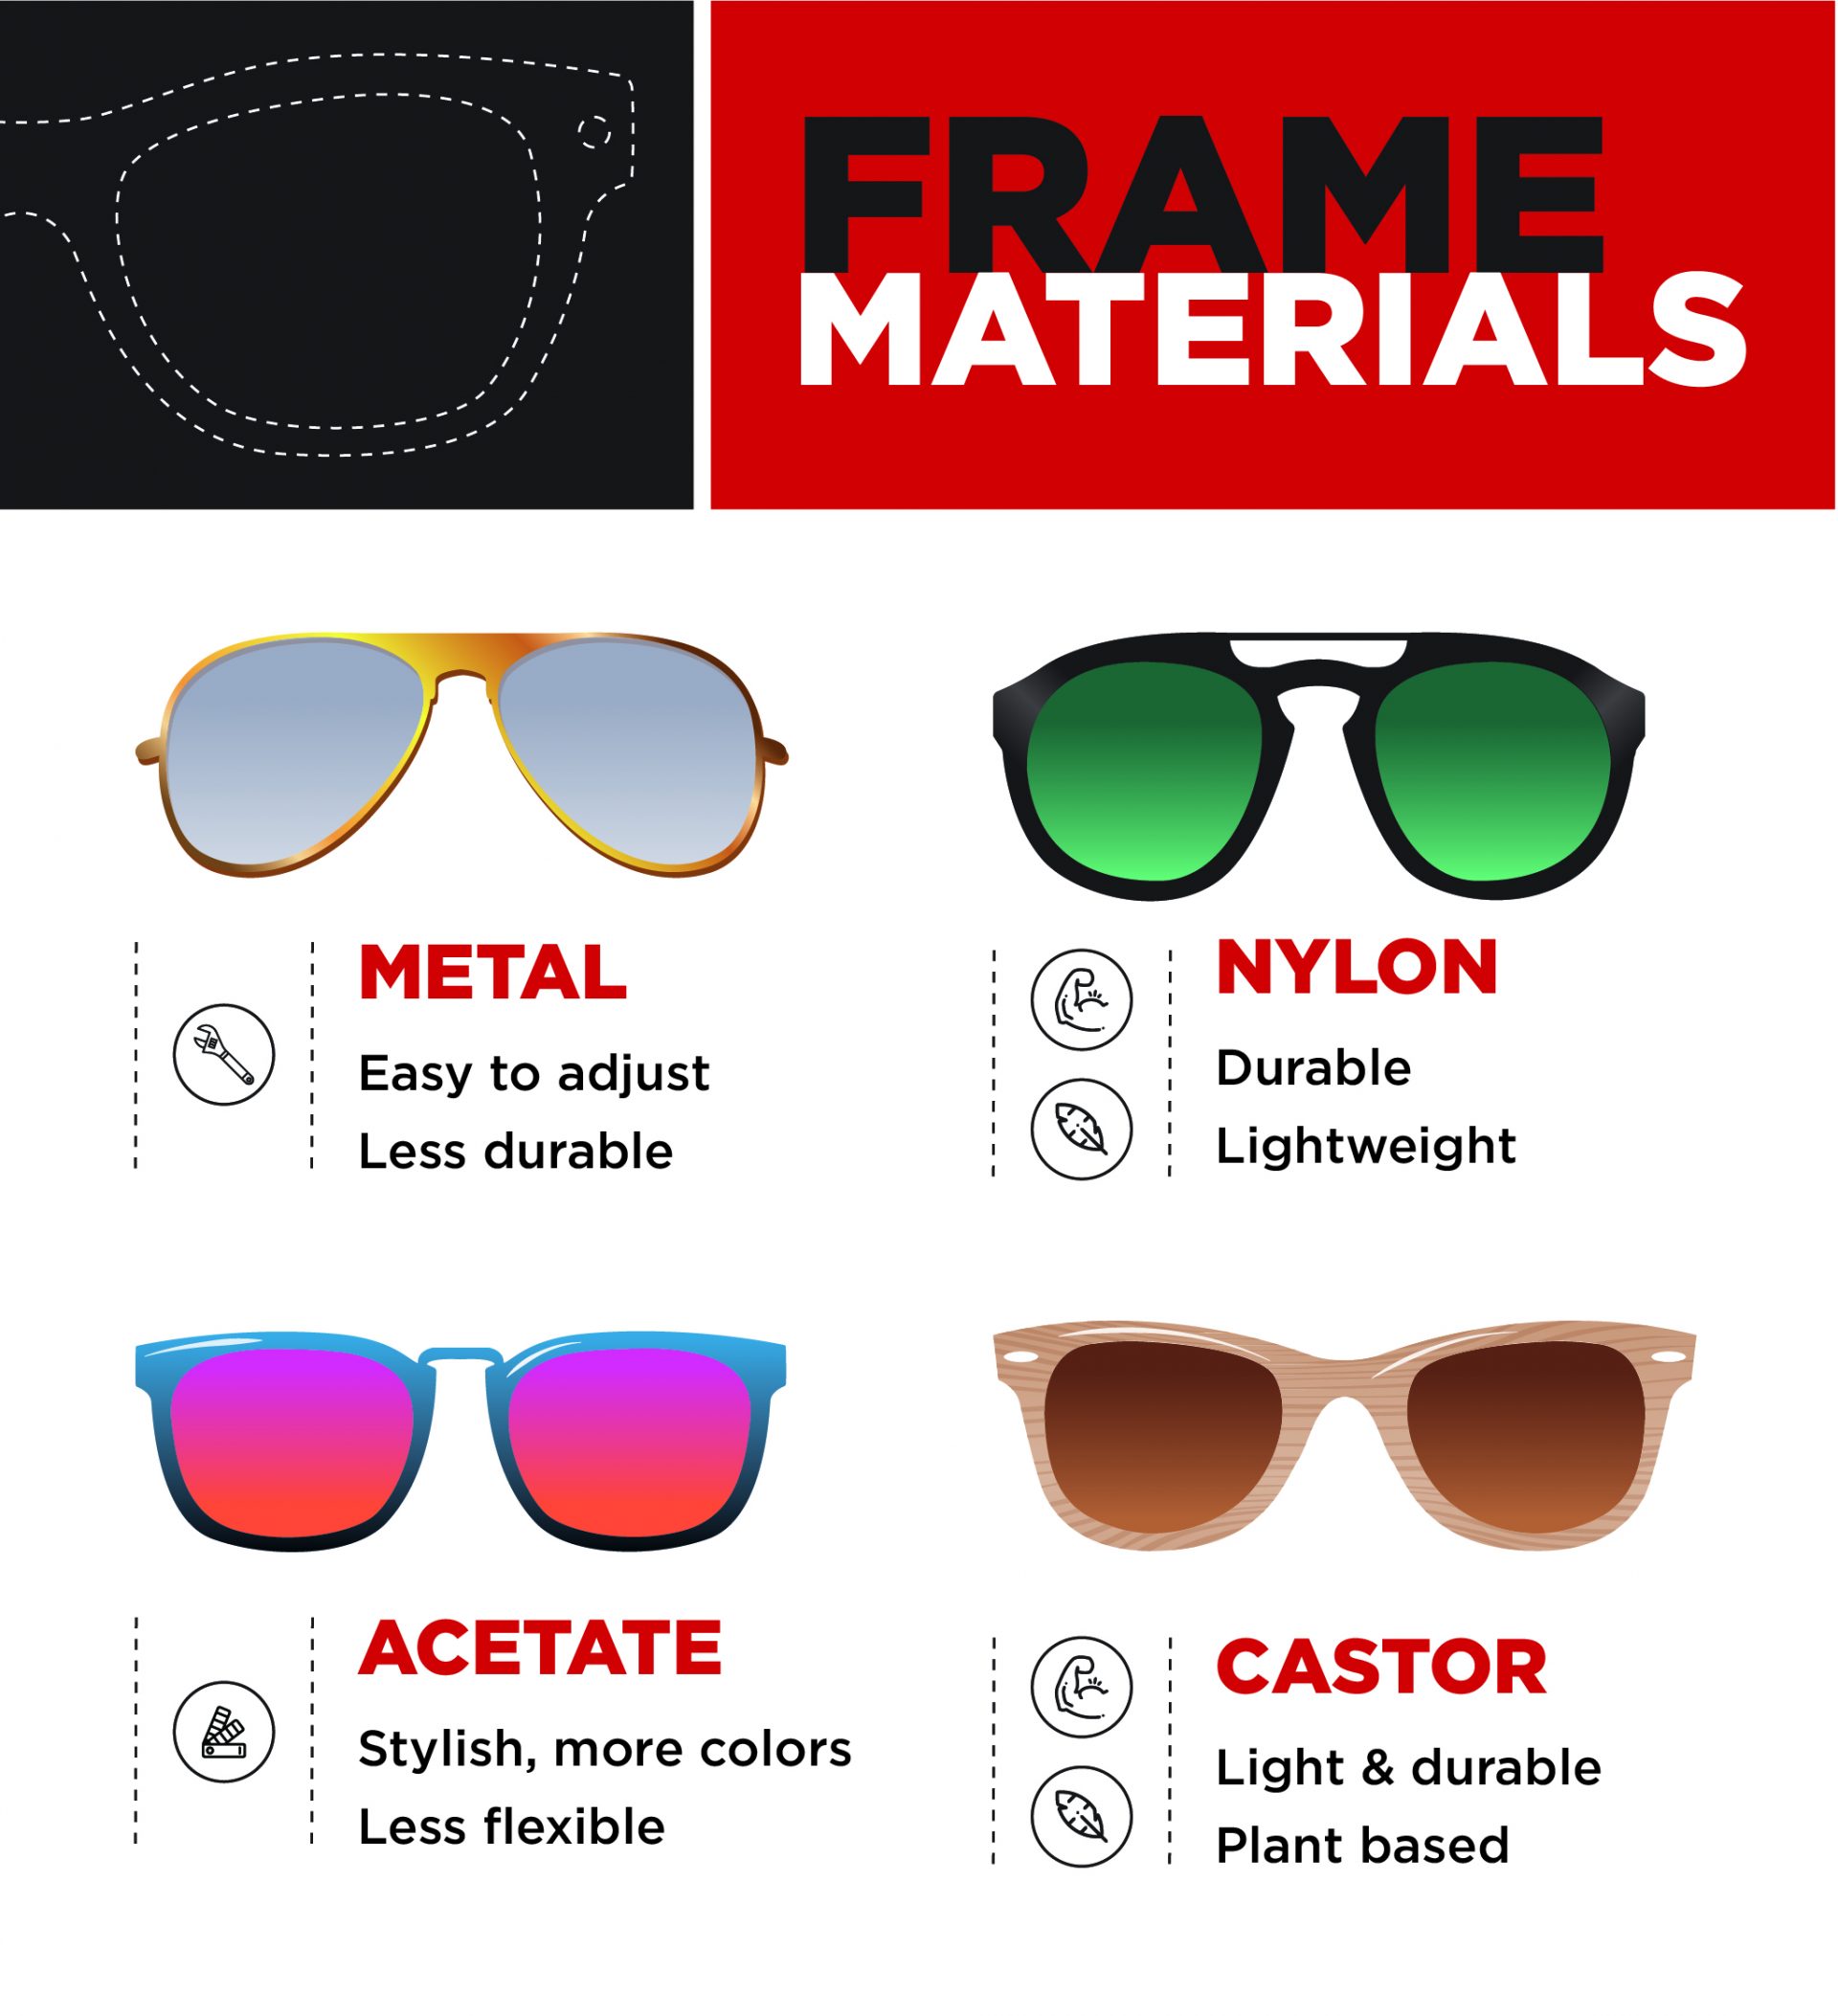 Selecting Shades Your Guide To Choosing Sunglasses Ezontheeyes 